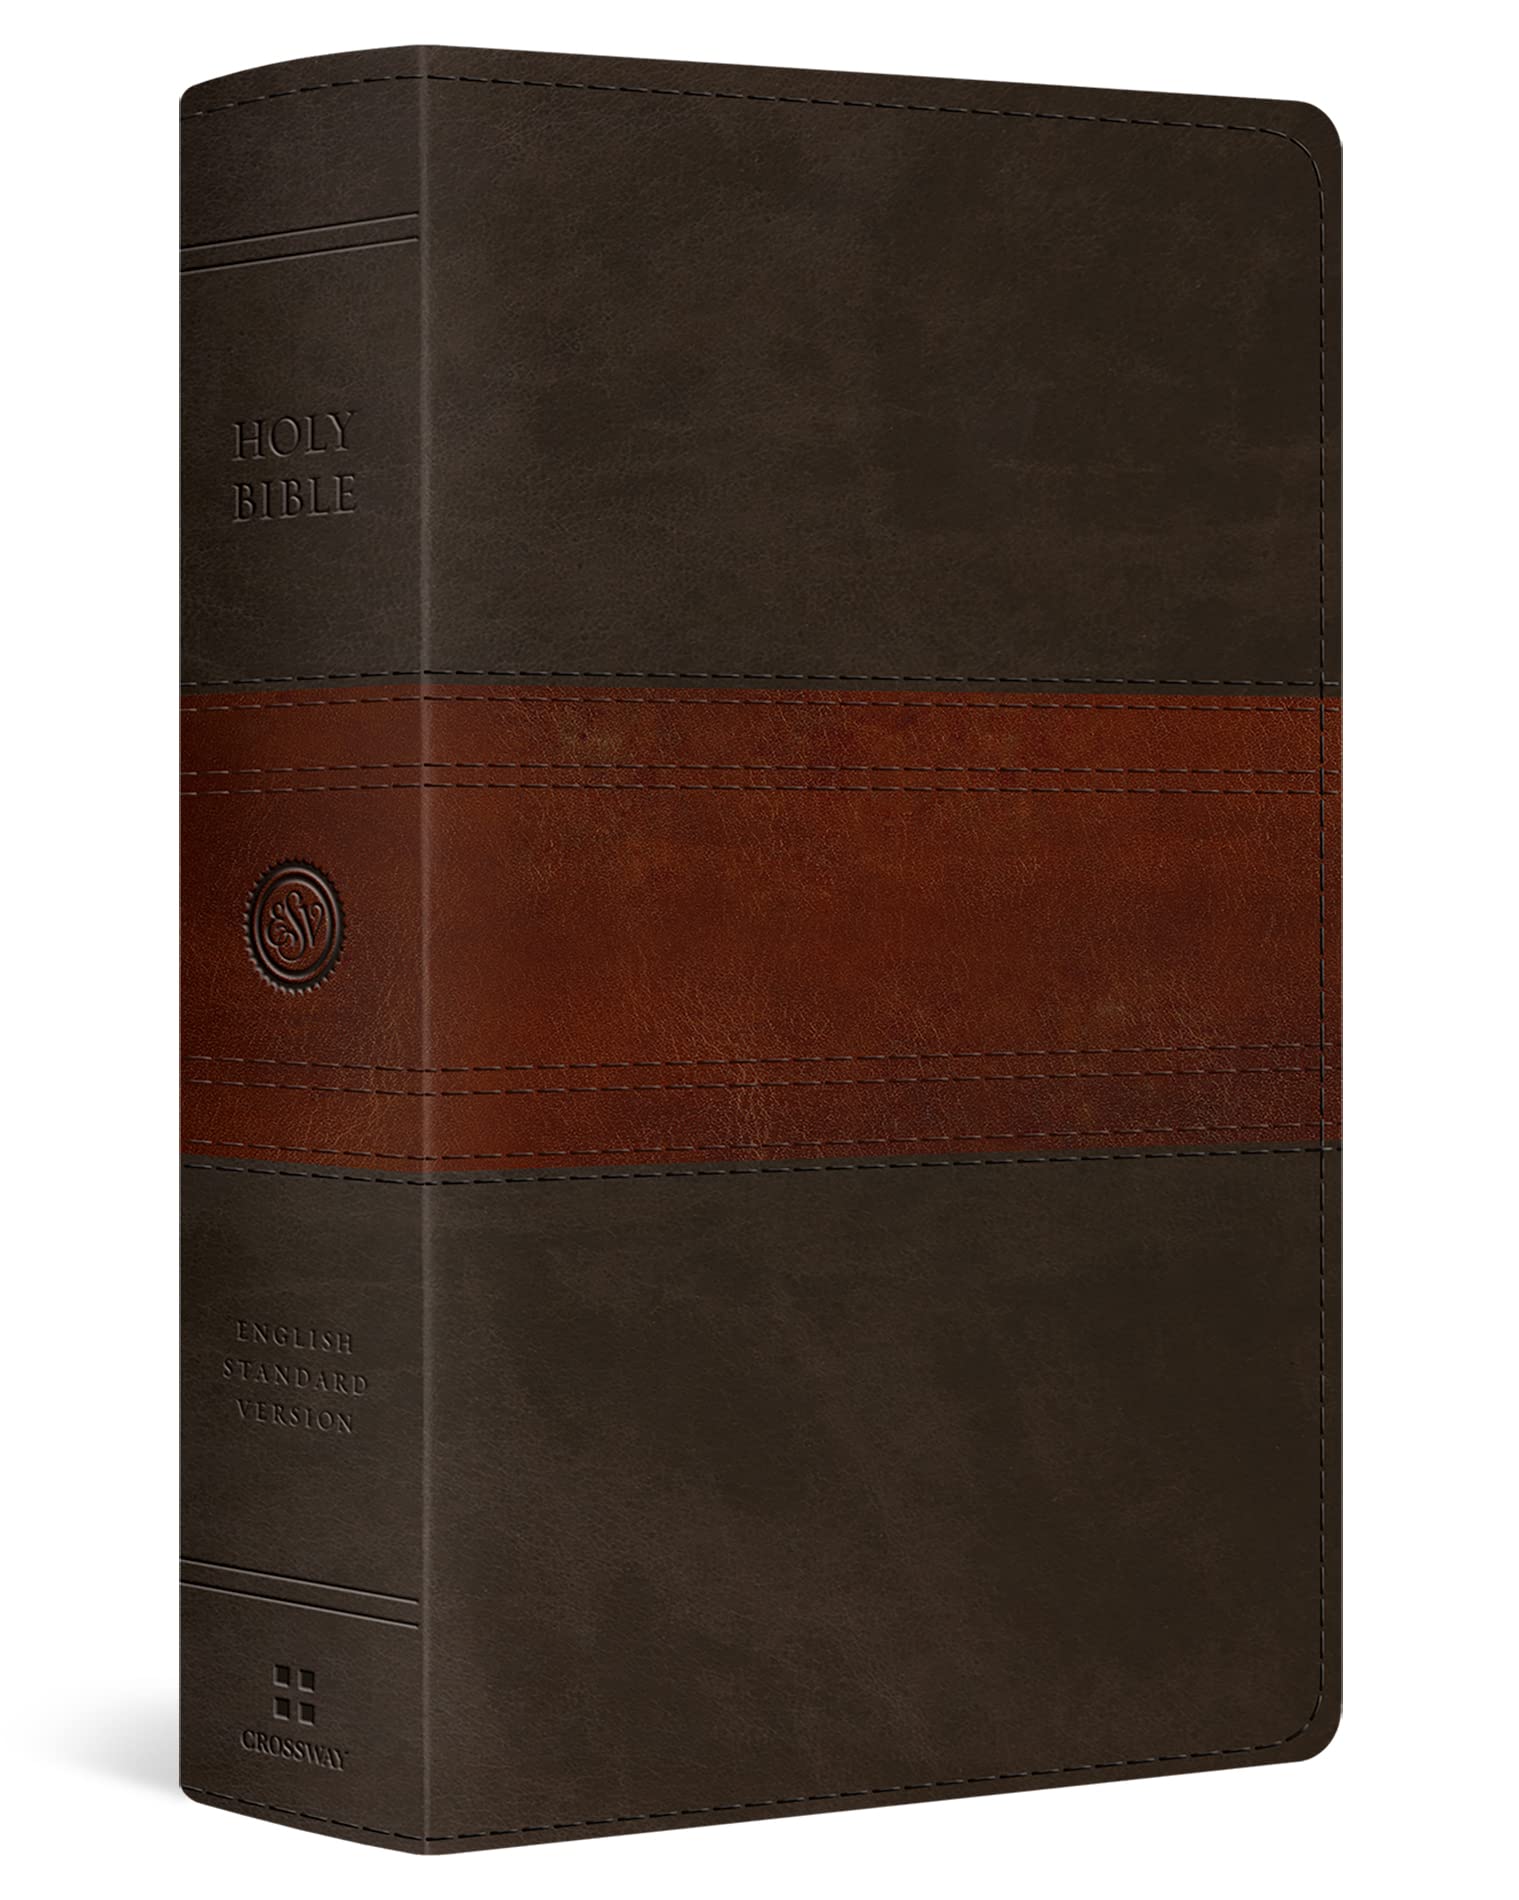 ESV Large Print Personal Size Bible (Trutone, Forest/Tan, Trail Design) by